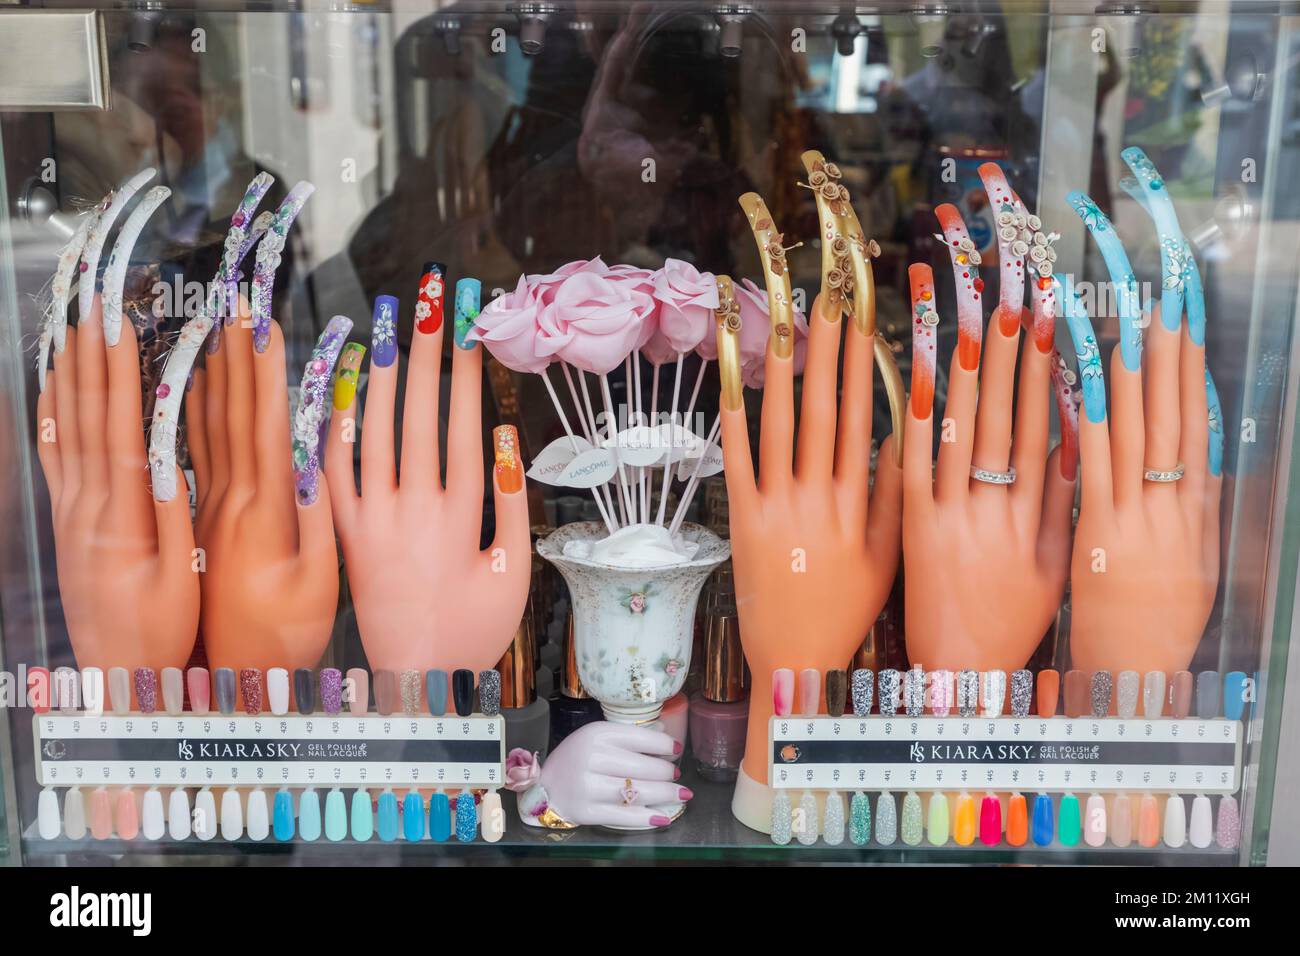 France, French Riviera, Cote d'Azur, Cannes, Nail Bar Window Display Stock Photo